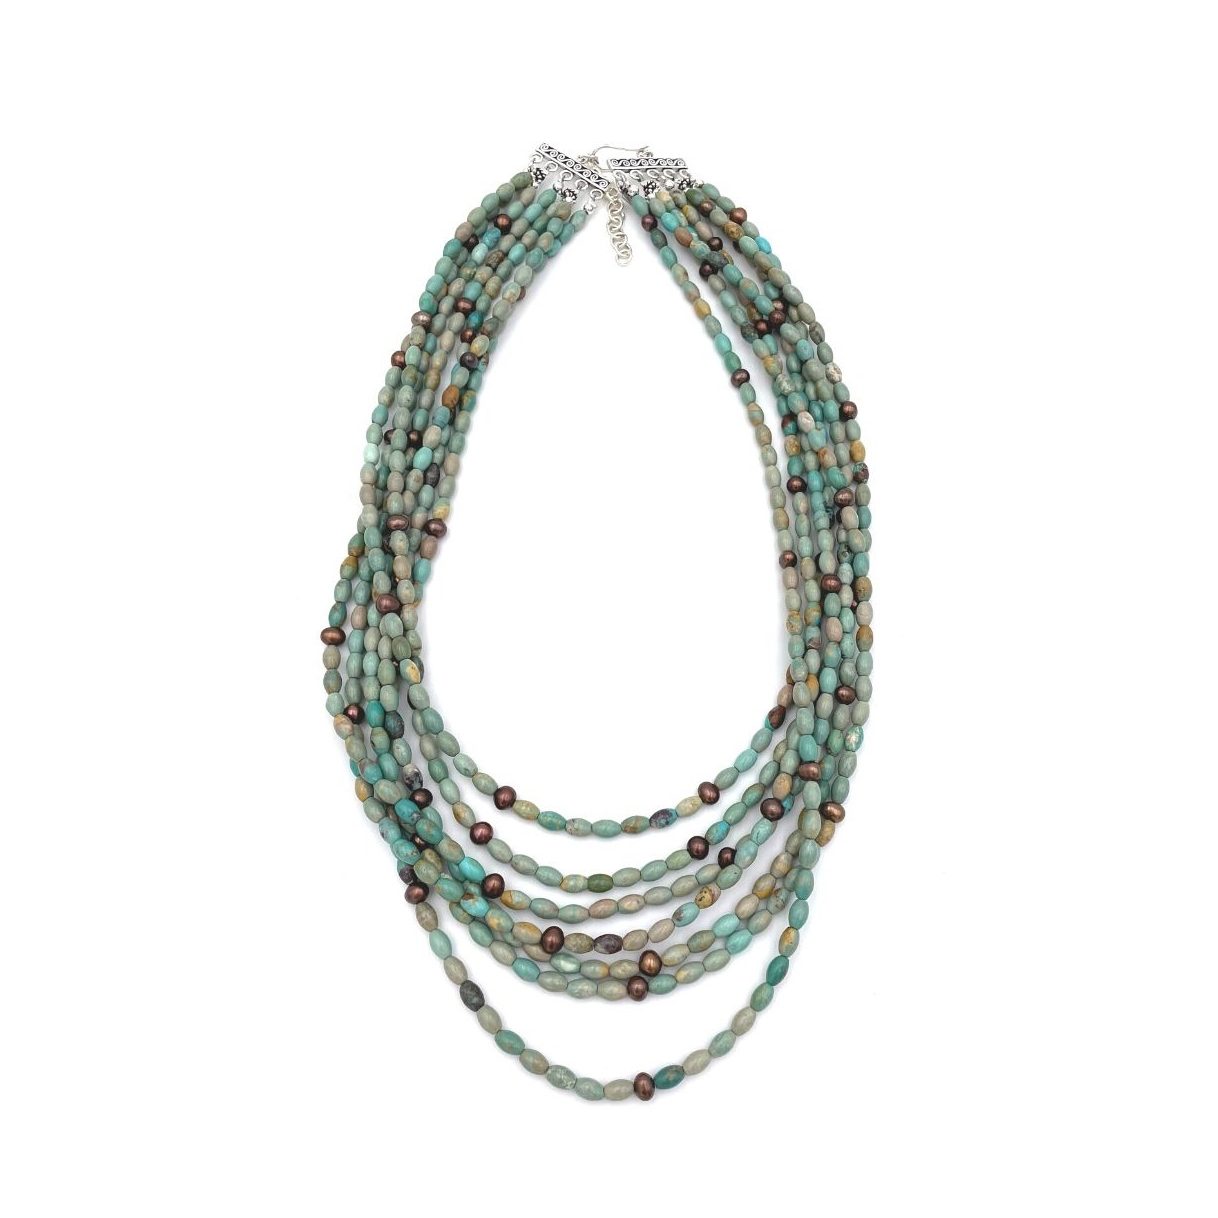 Seven Strand Green Turquoise Necklace by Paige Wallace